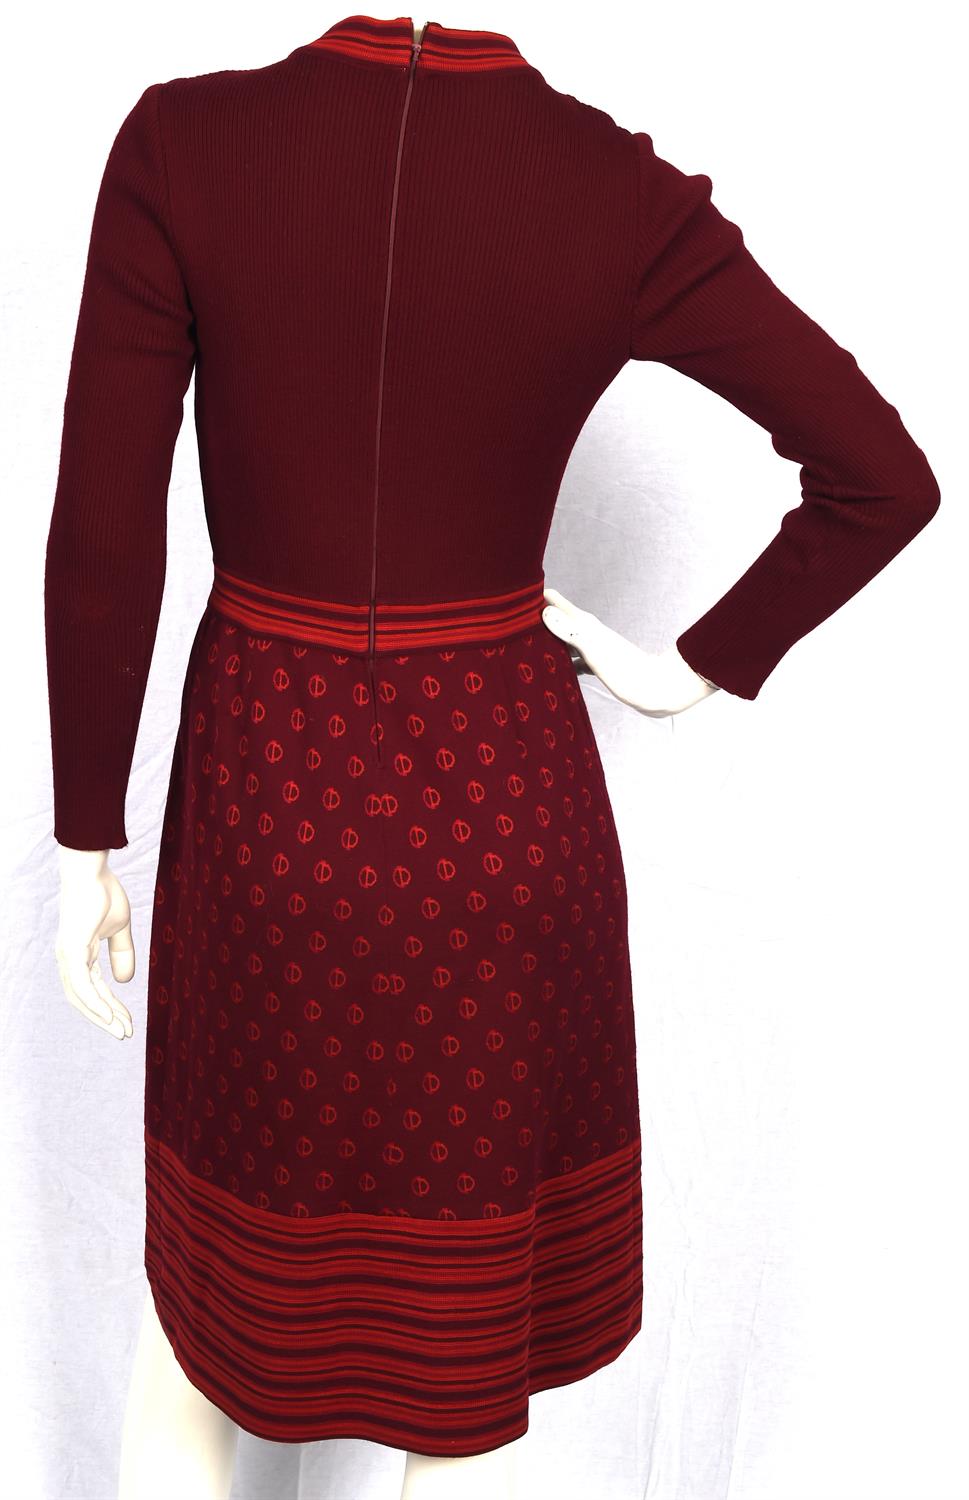 CHRISTIAN DIOR DIORLING 1970s knitted wool dress in burgundy and orange. Fits UK10 * CHRISTIAN DIOR - Image 4 of 13